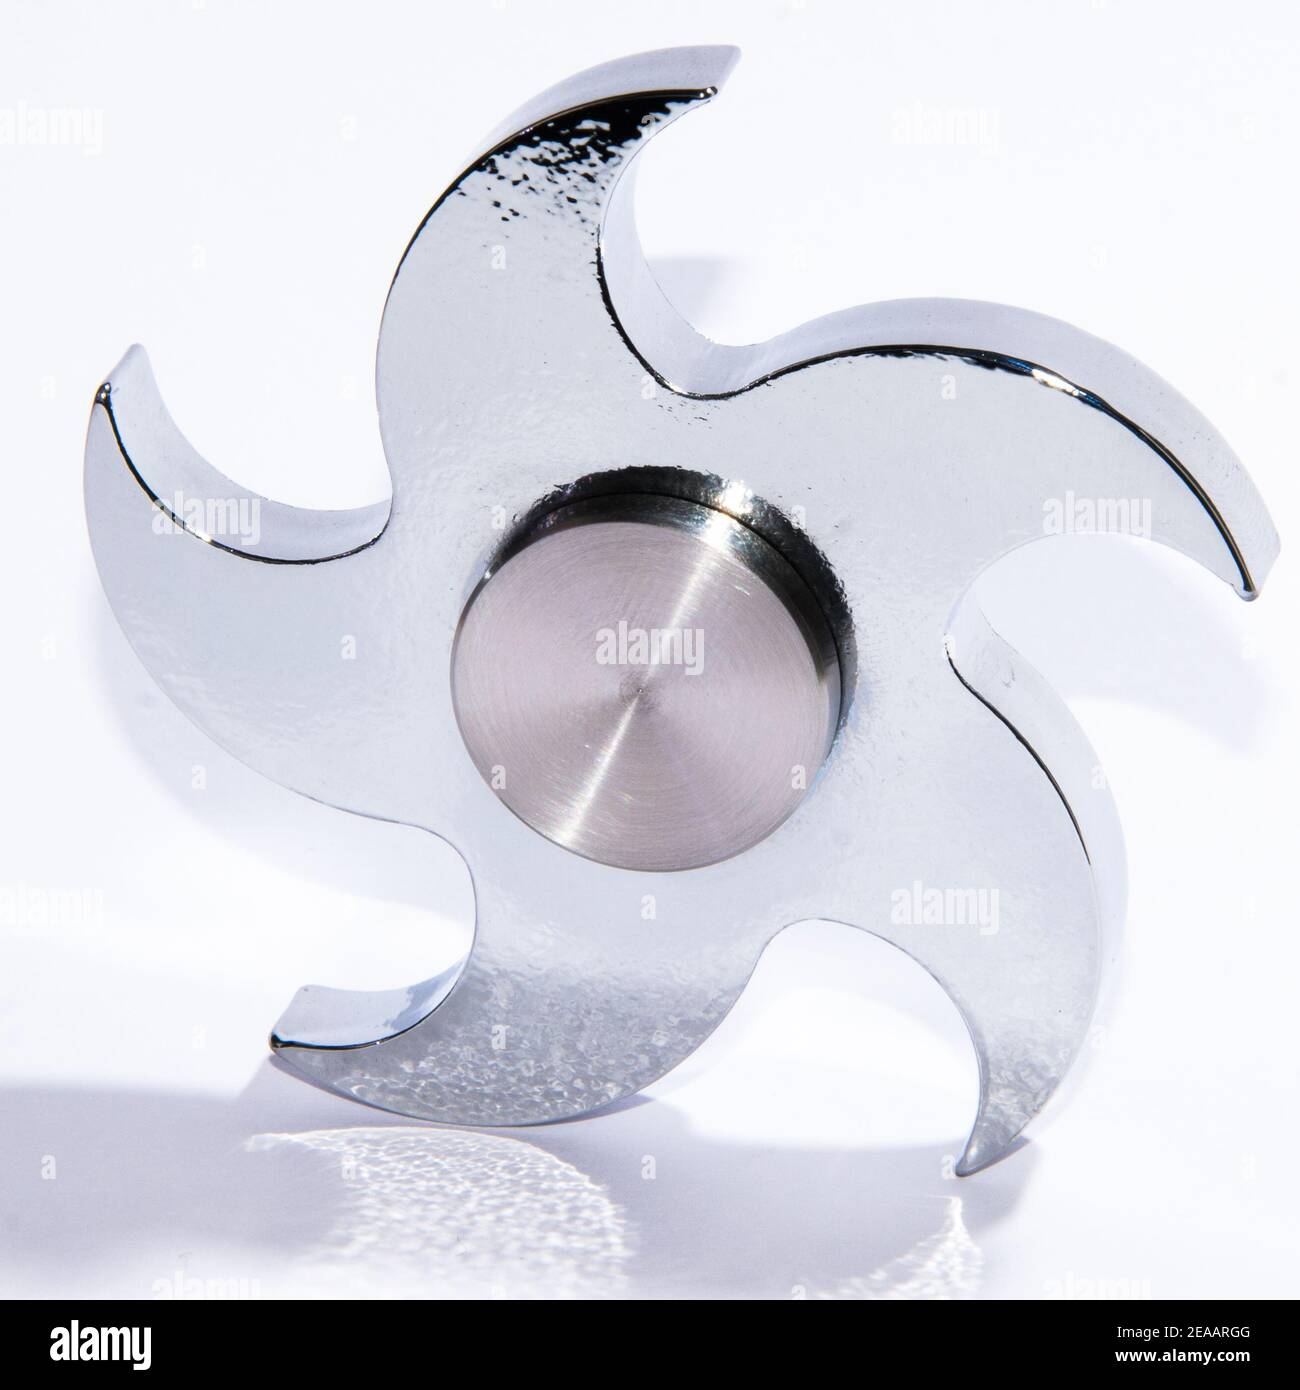 Fidget spinner to relax, relieve stress, play  Stock Photo